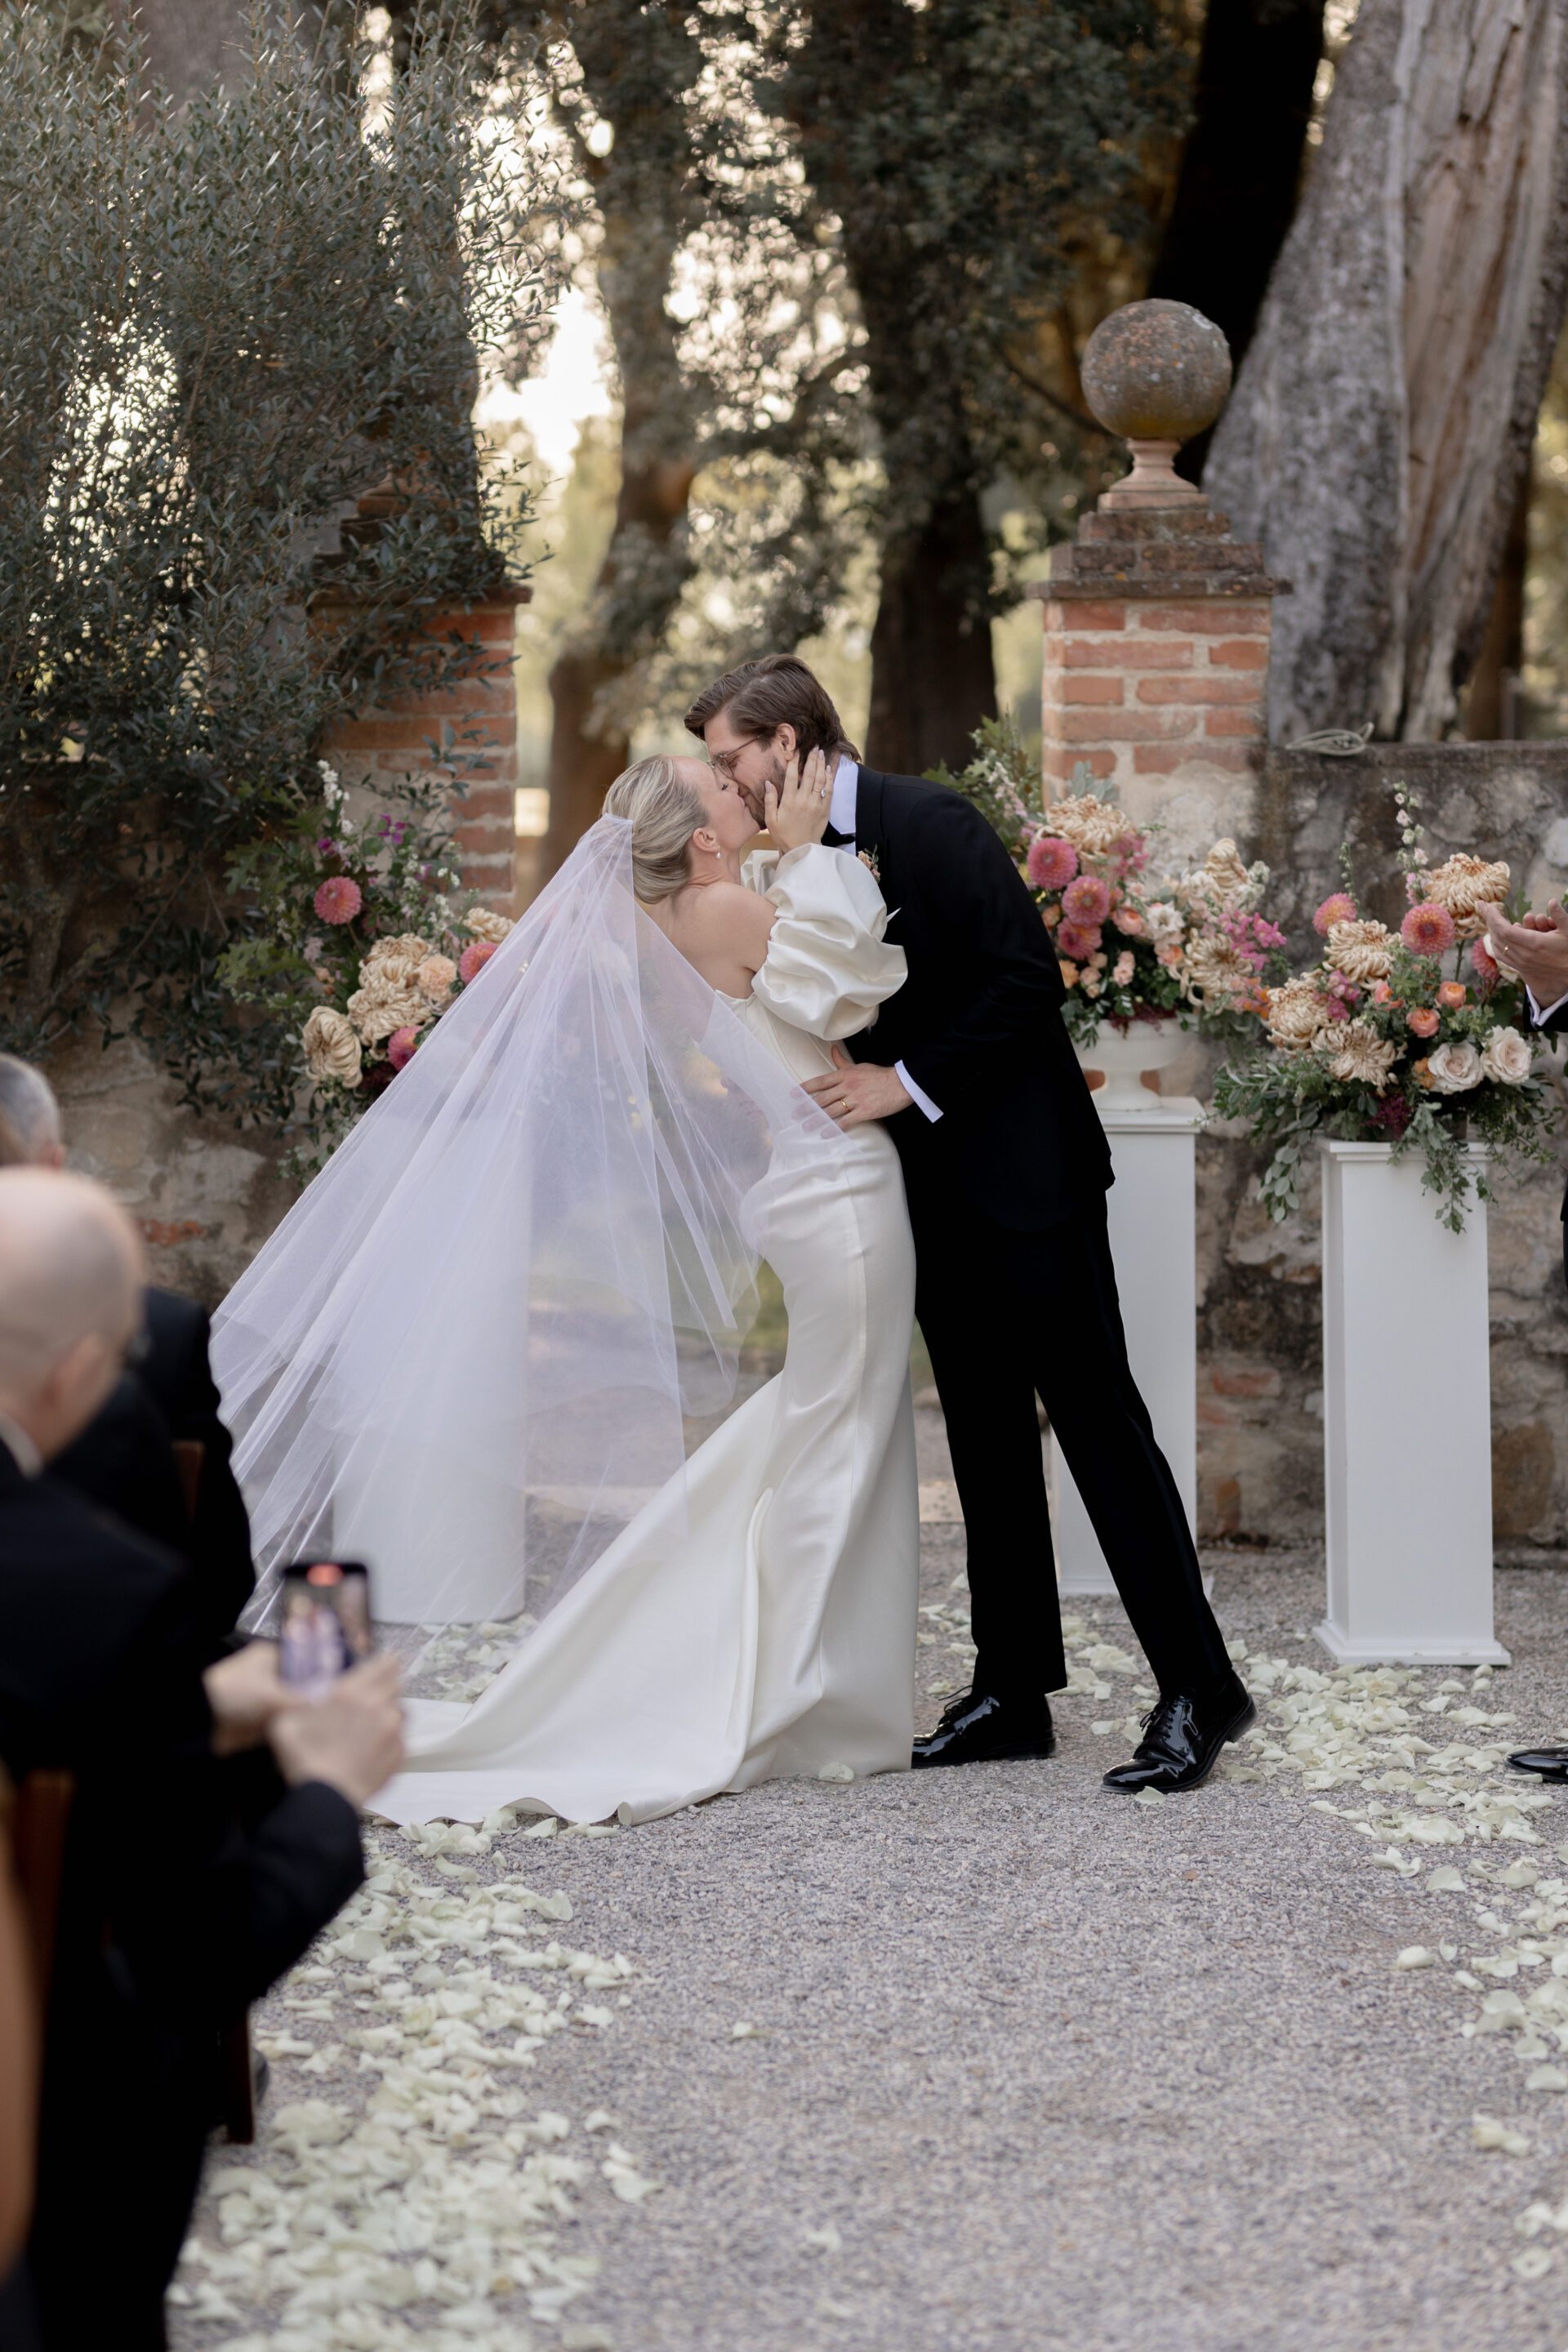 The bride and groom kiss during their Italian wedding ceremony